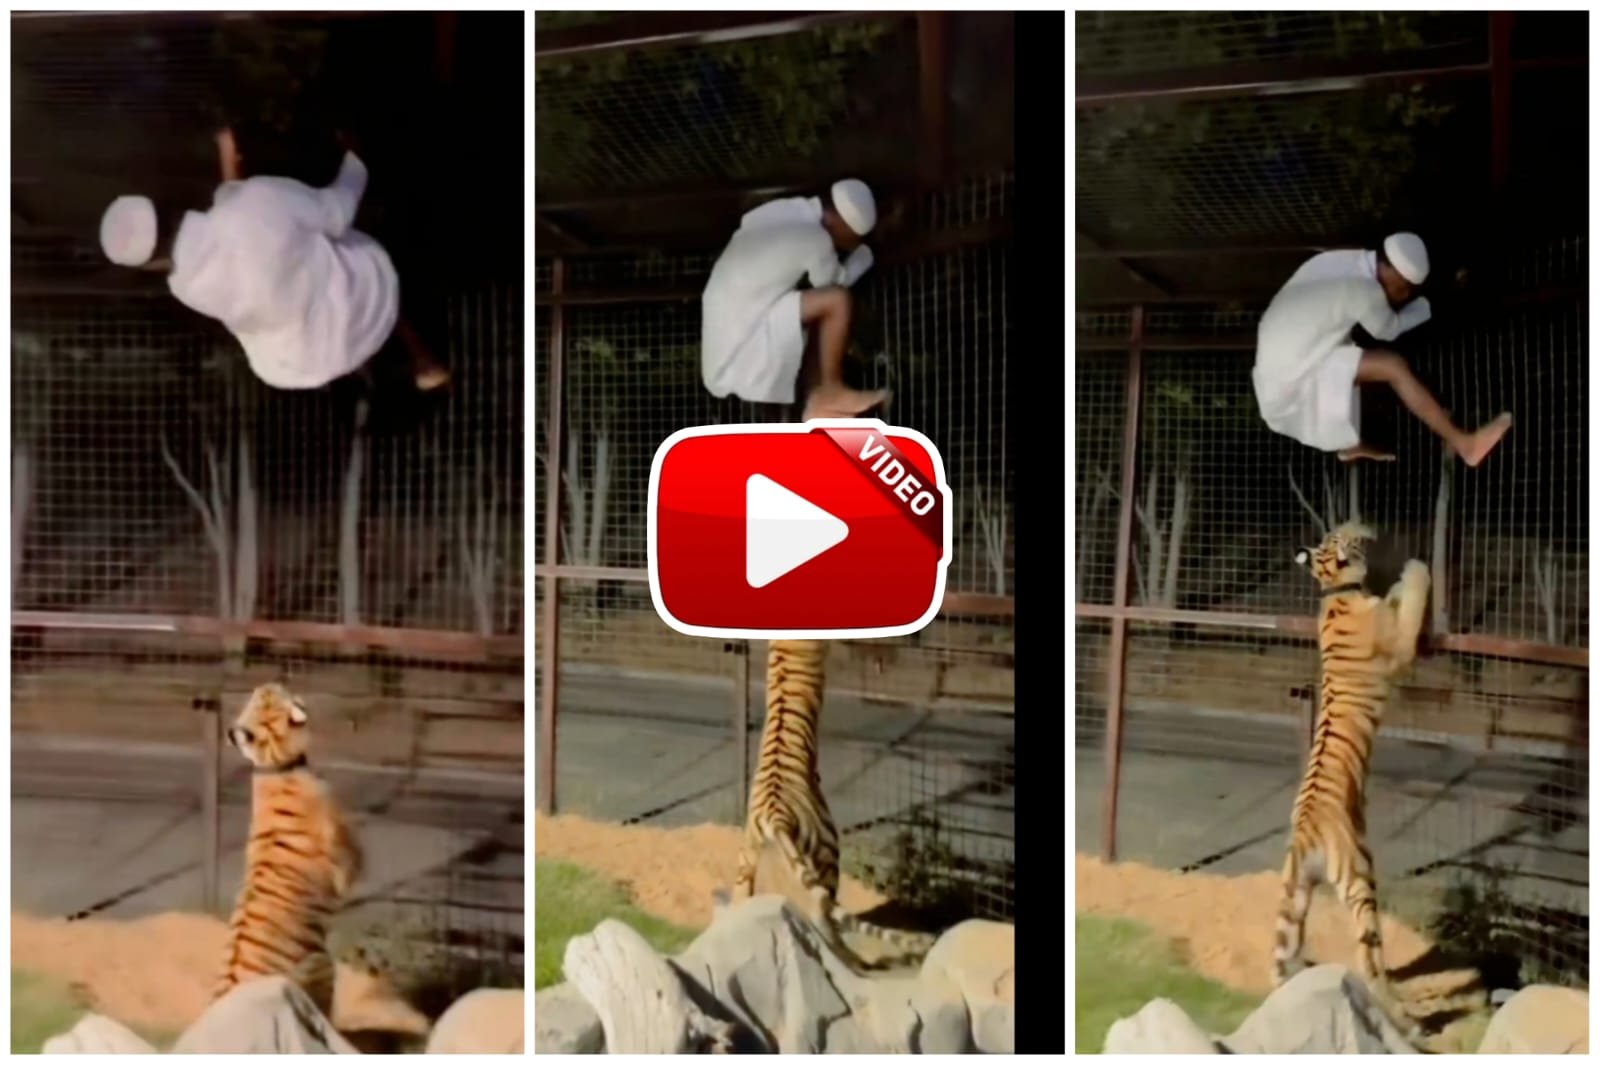 Bagh Ka Video - A man hanged upside down on a net to save himself from the dreaded tiger.